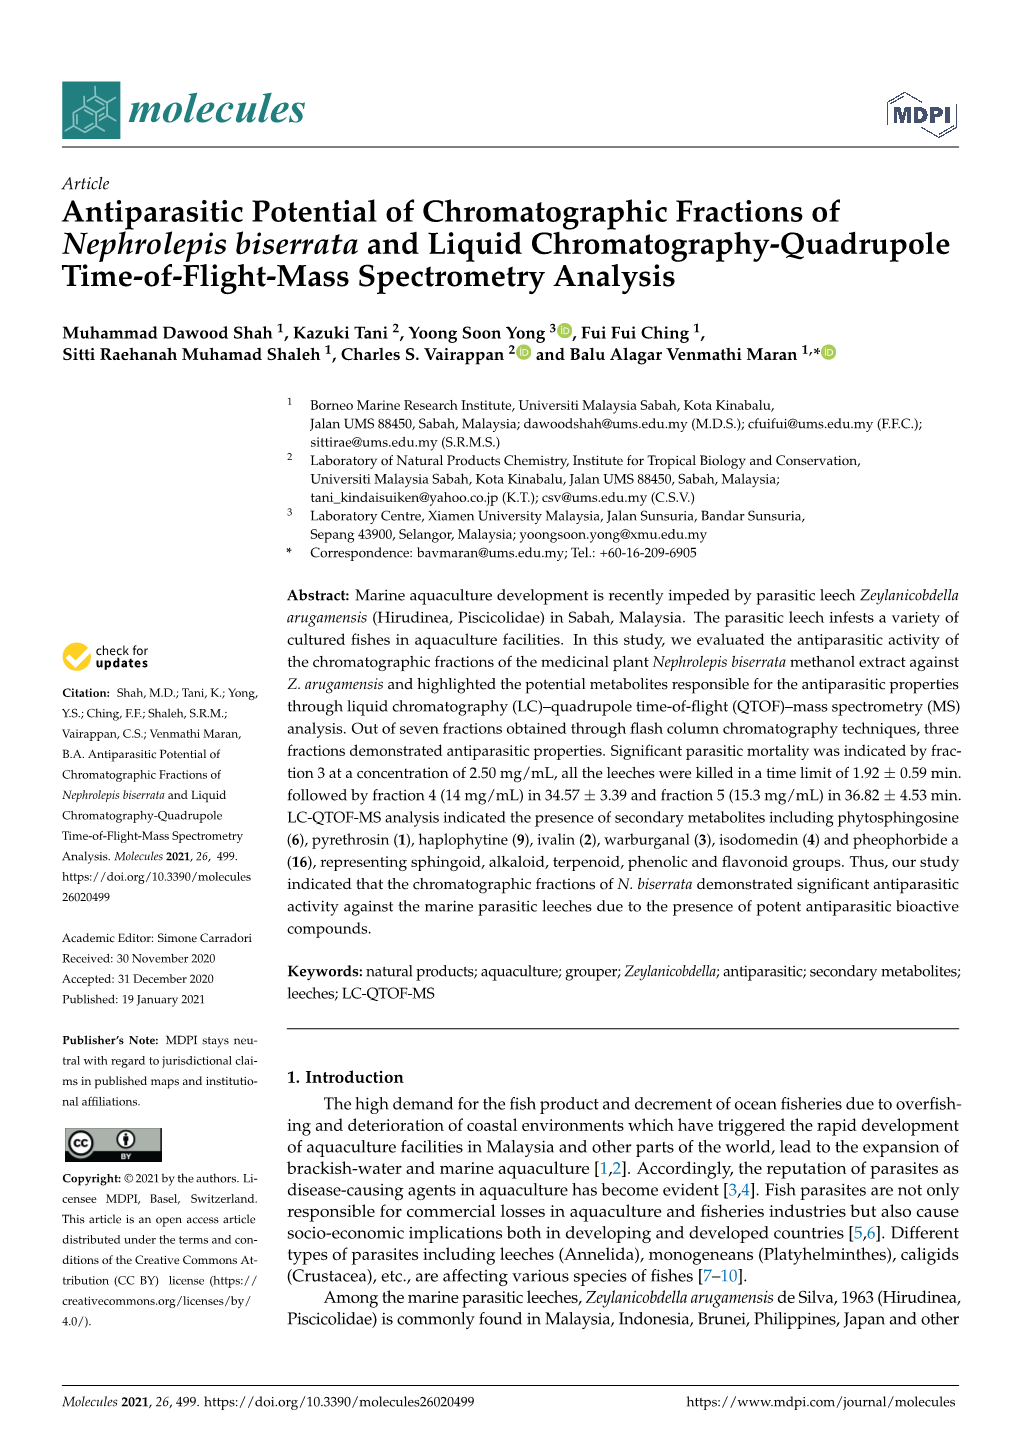 Antiparasitic Potential of Chromatographic Fractions of Nephrolepis Biserrata and Liquid Chromatography-Quadrupole Time-Of-Flight-Mass Spectrometry Analysis